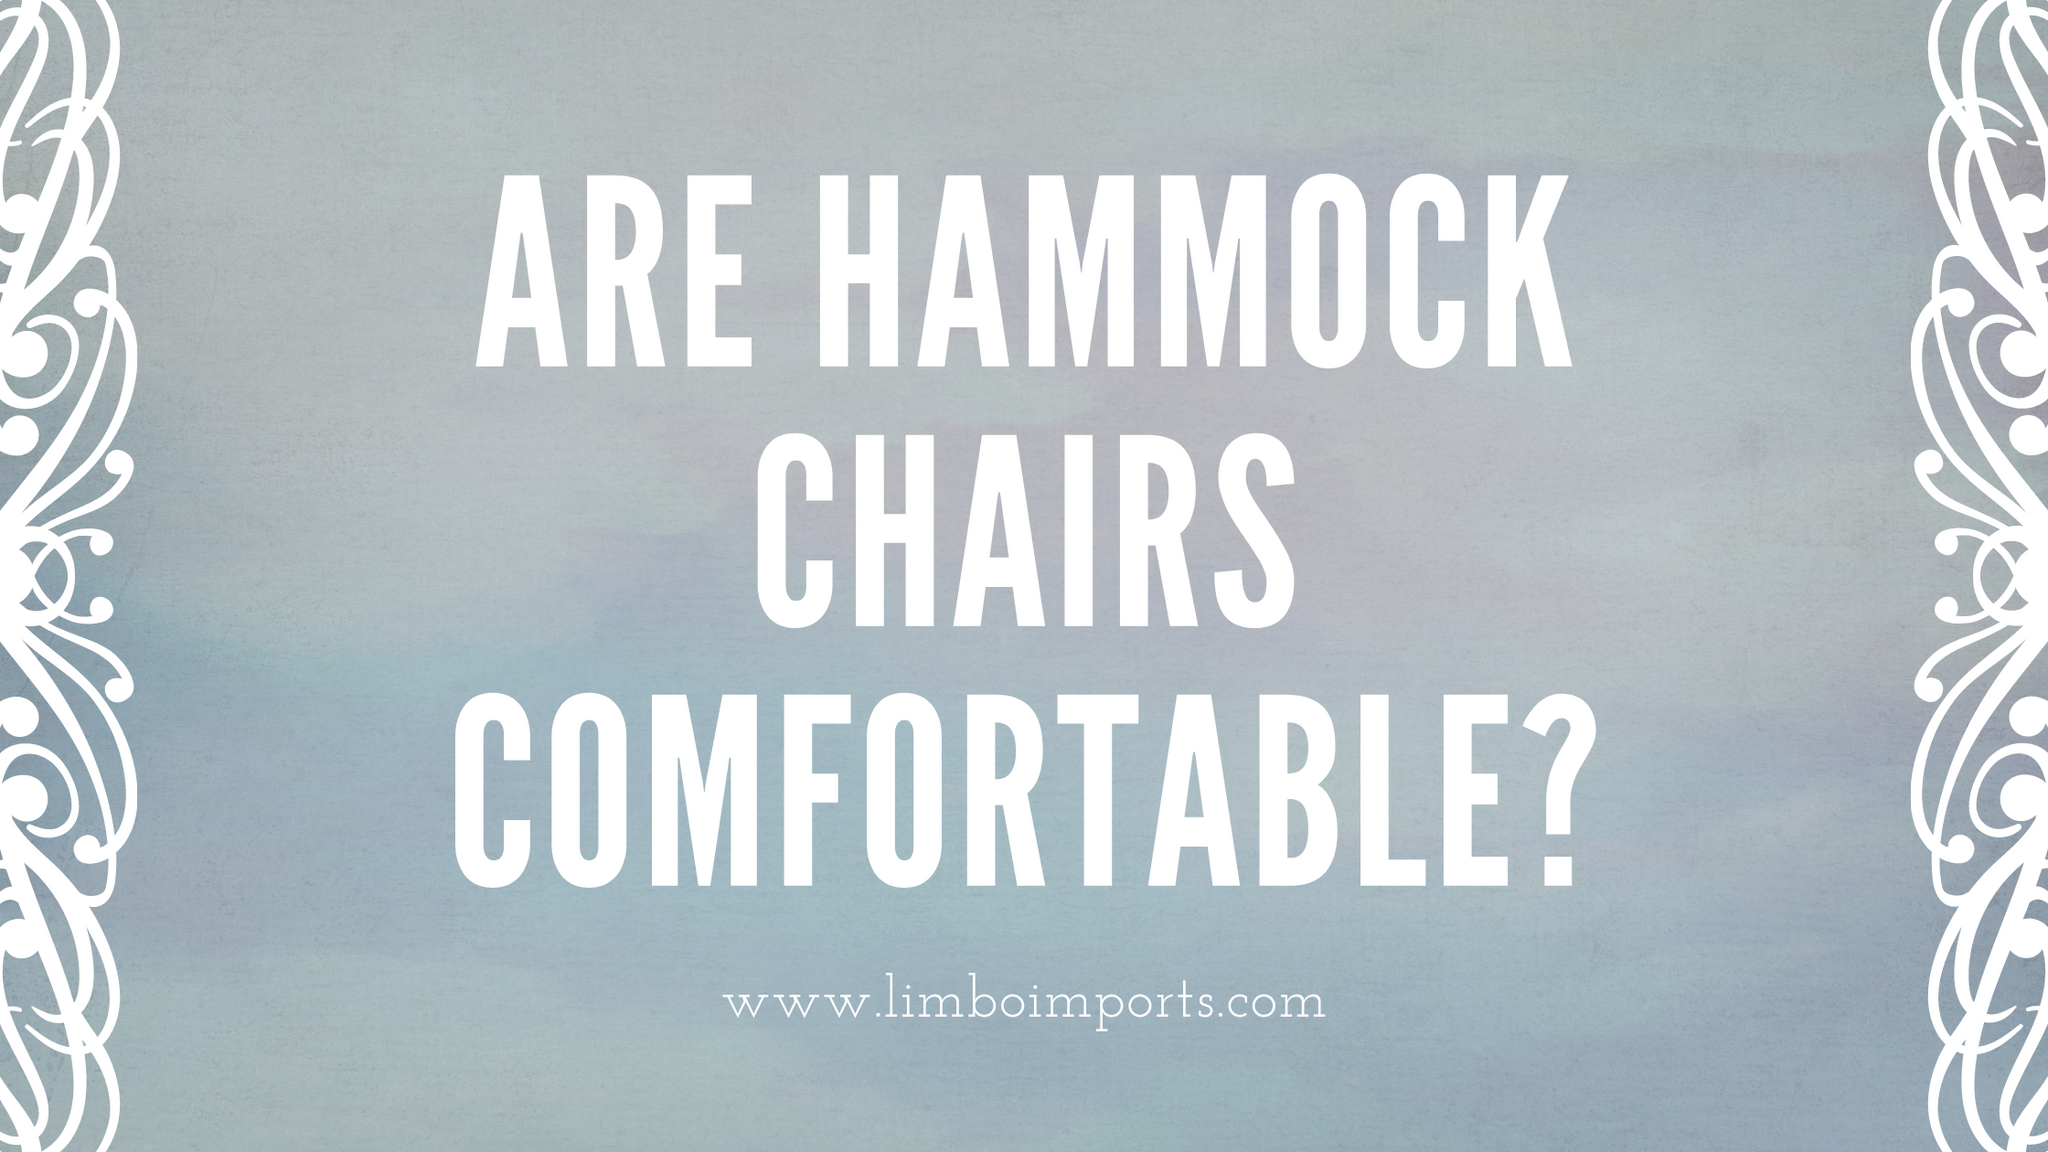 ARE HAMMOCK CHAIRS COMFORTABLE?